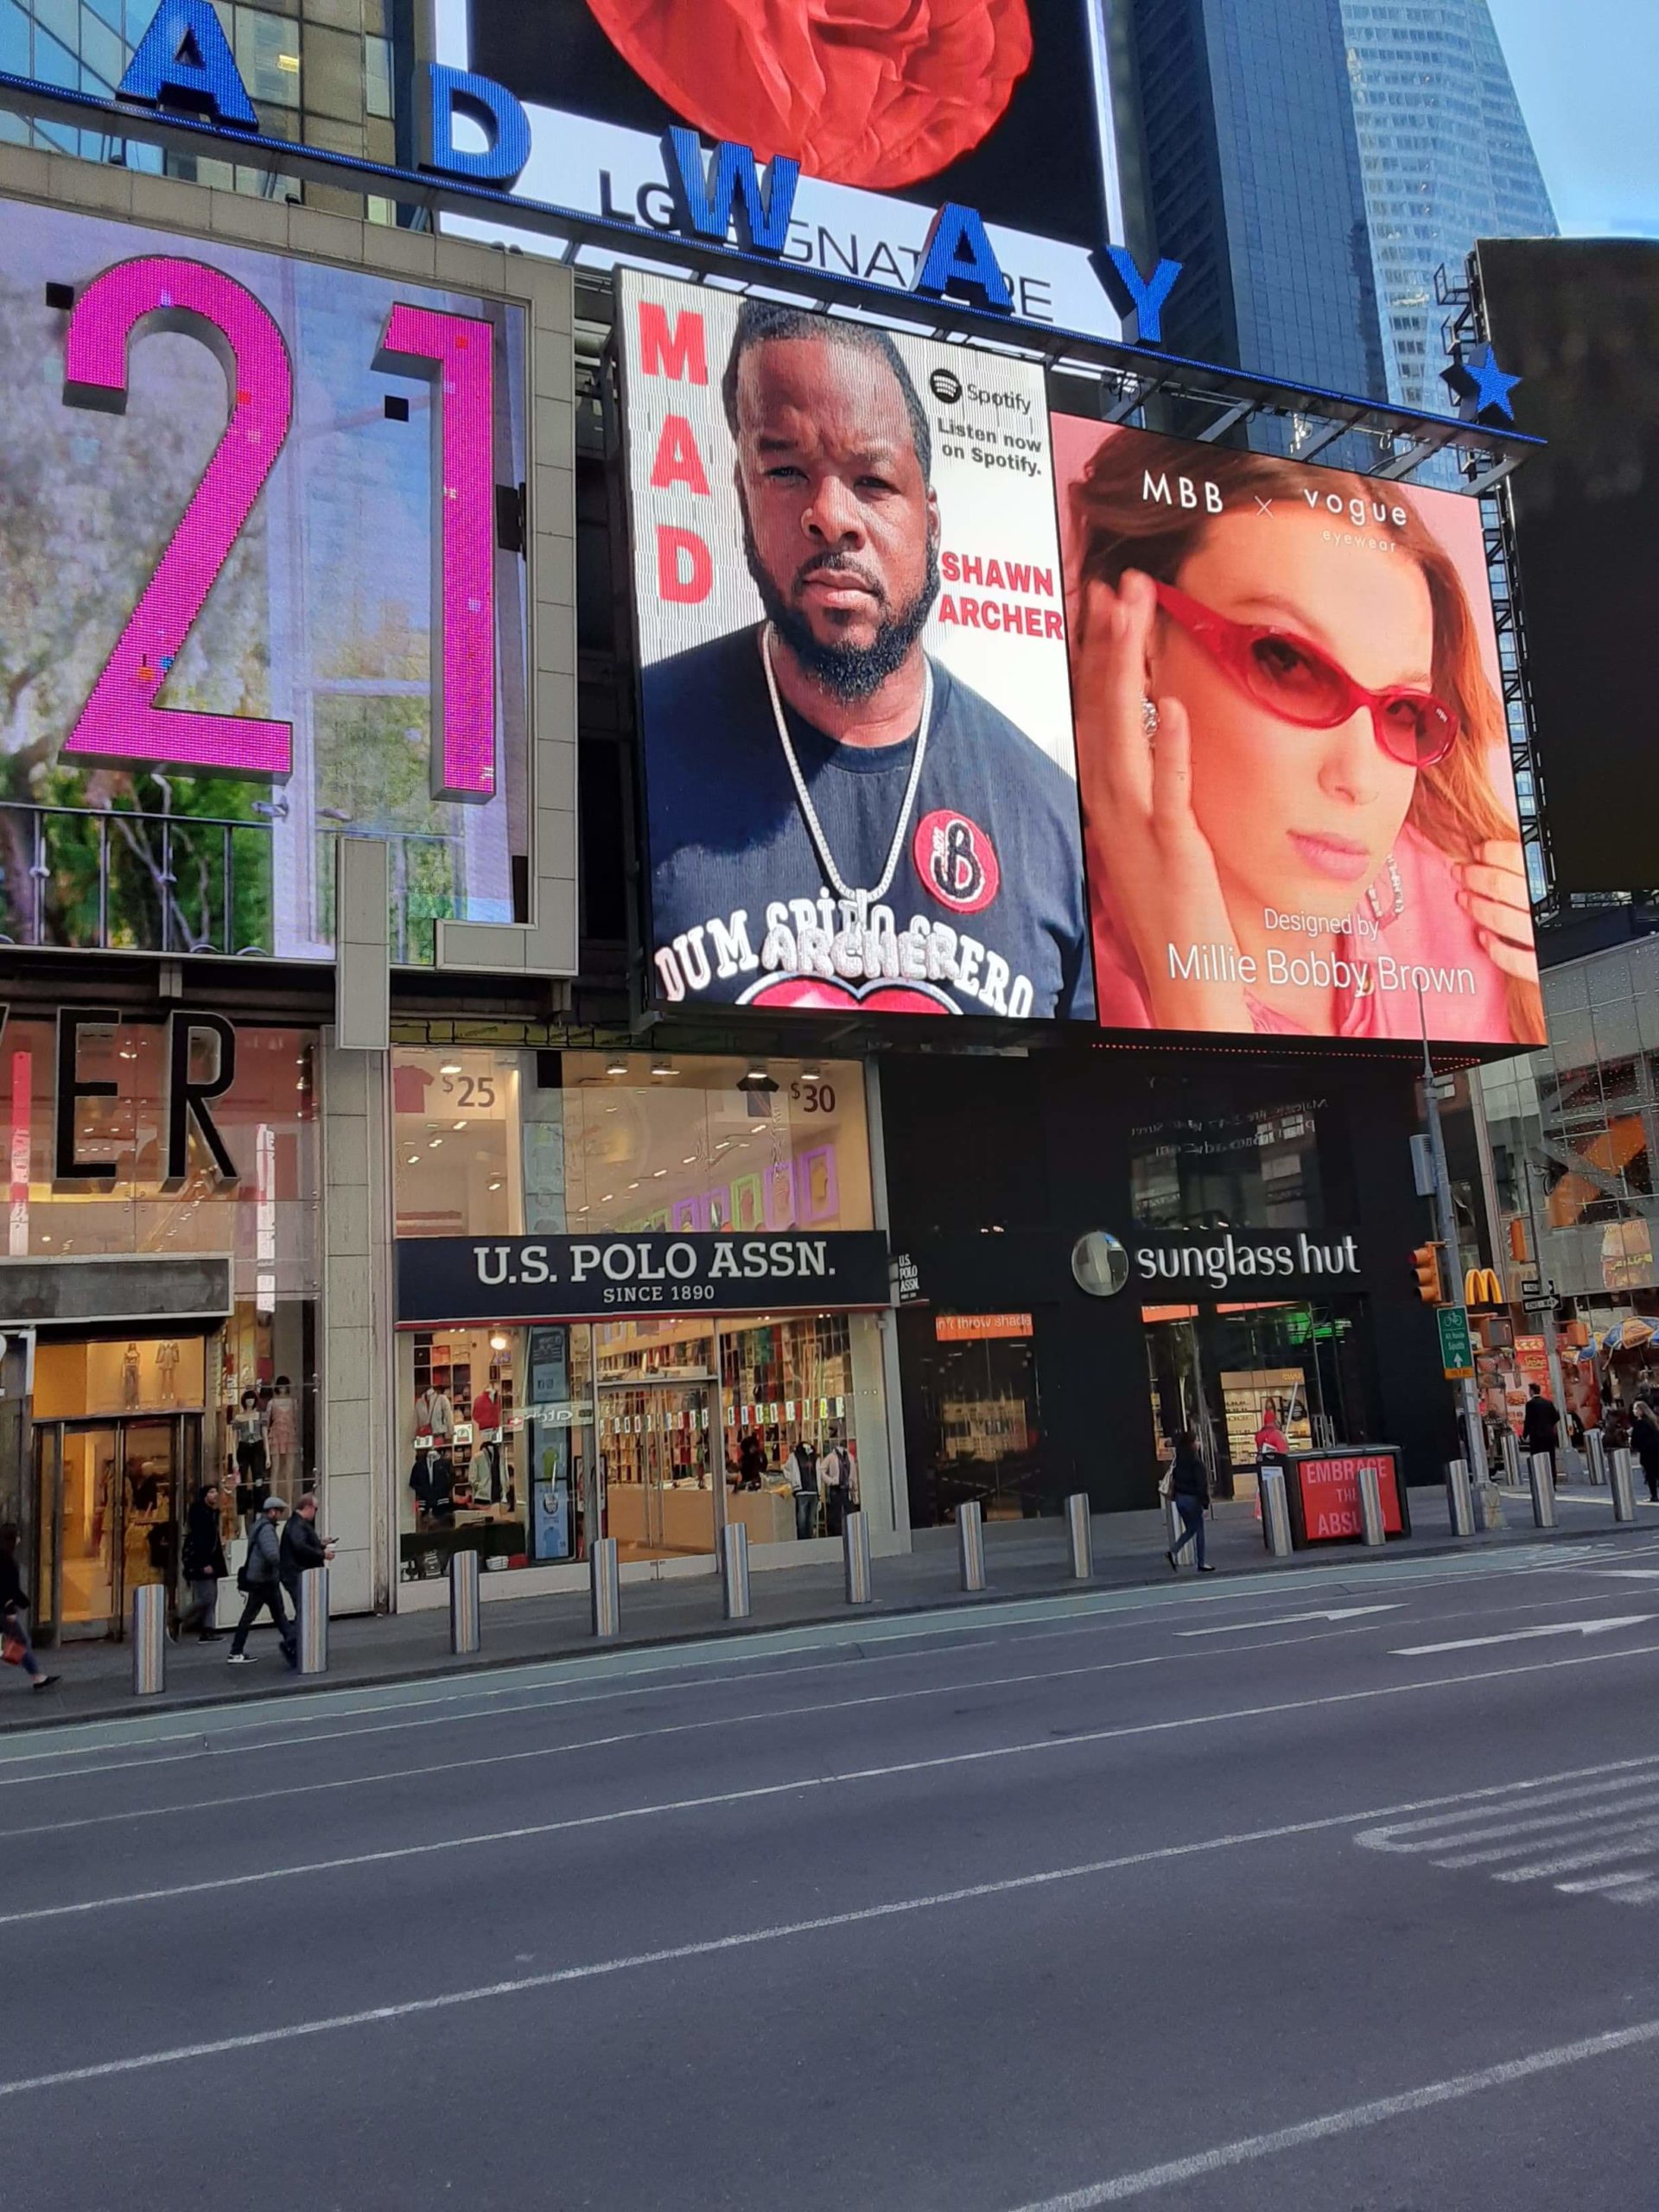 Shawn Archer debuts single “Mad” with Billboard in Times Square NYC!